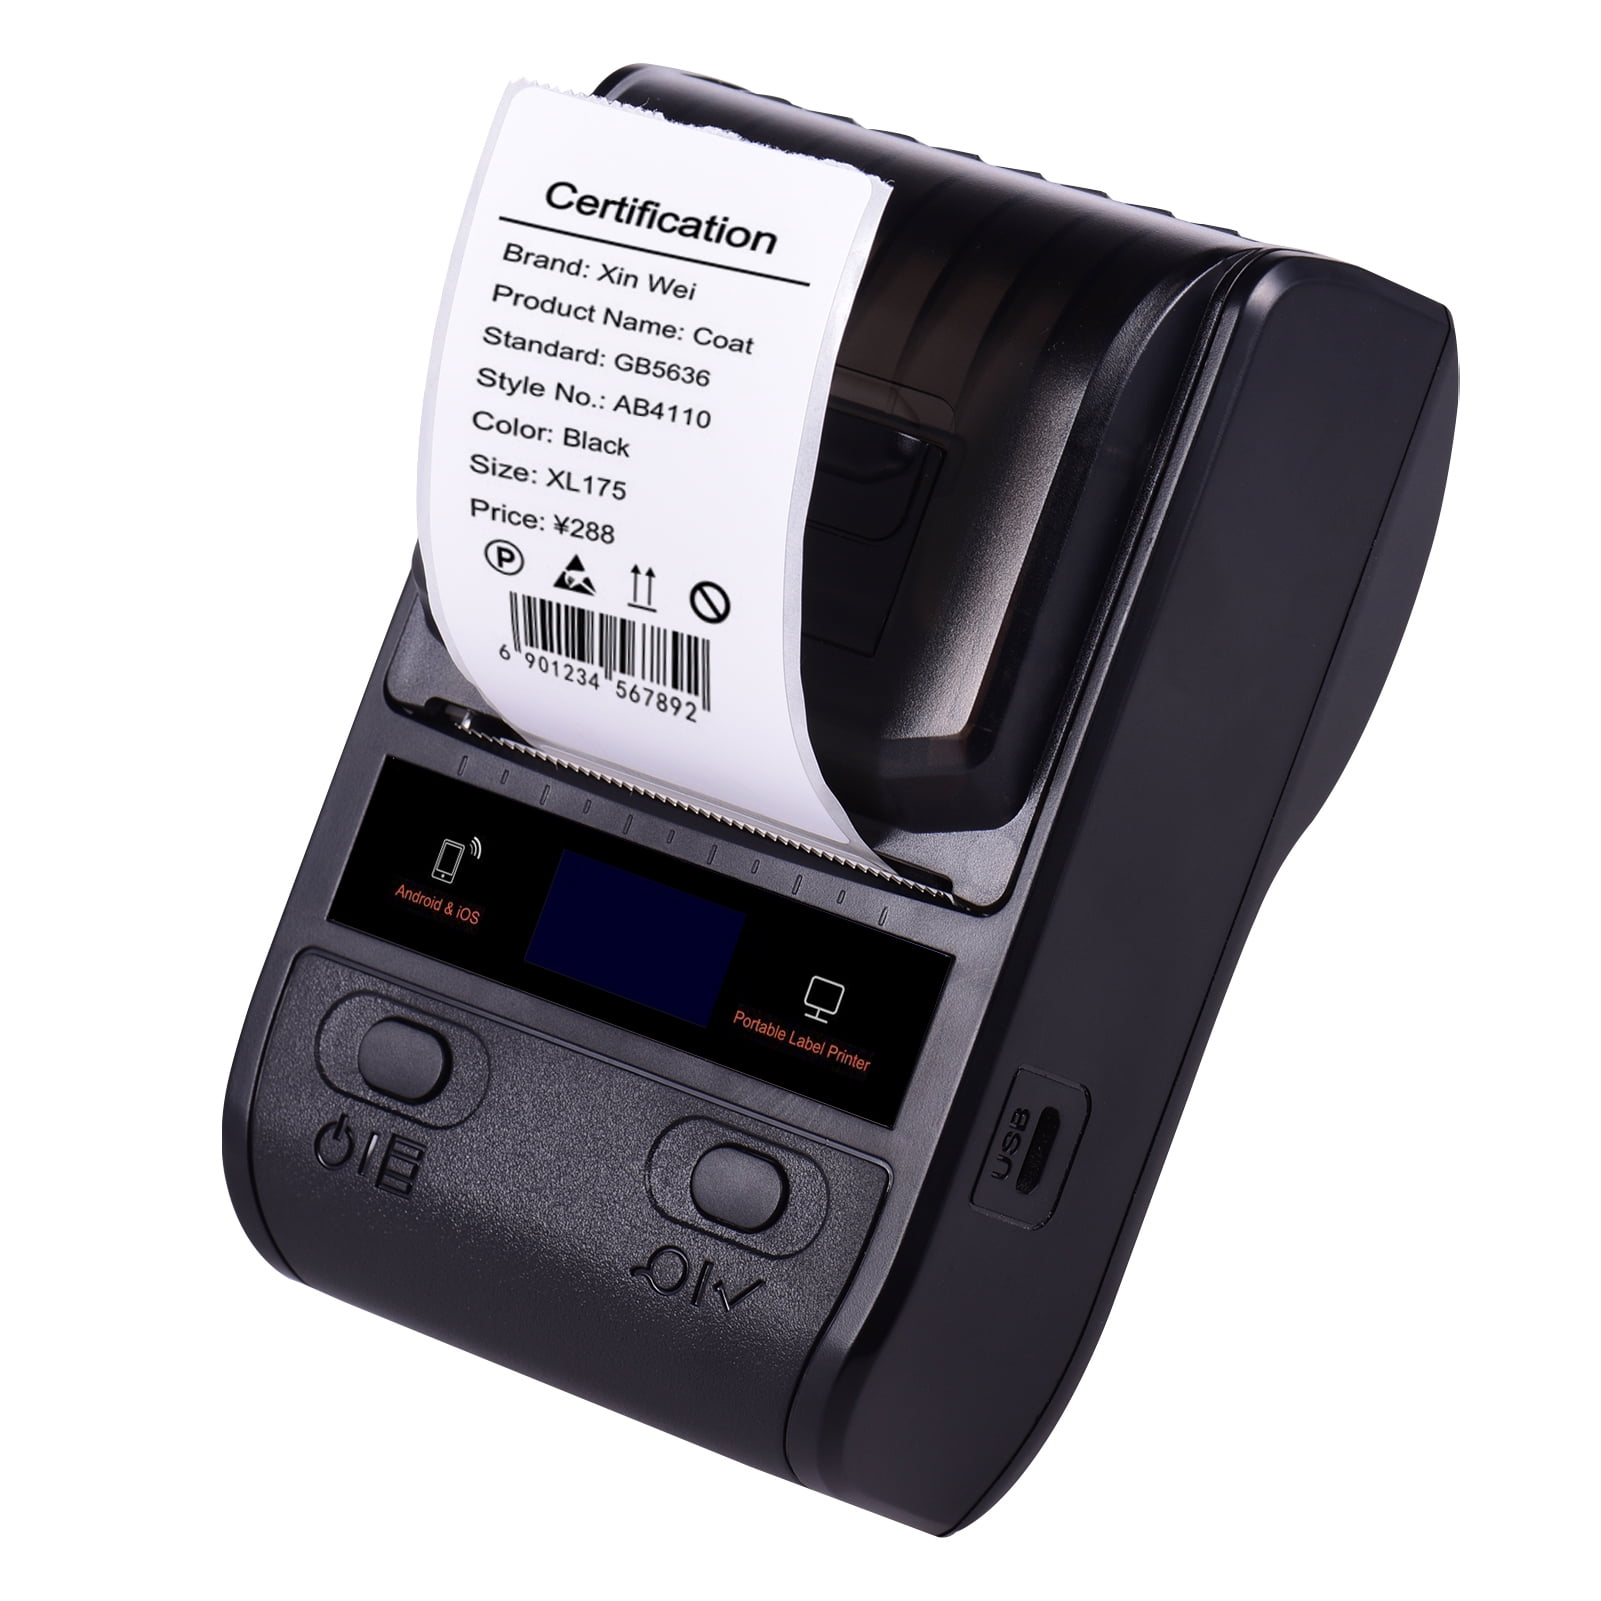 Tag ud samling vagt Tomshine DP23 57mm Portable Thermal Printer Wireless Shipping Express  Printer for Shipping Package Price Labels USB NFC BT Connection Support  ESCPOS Command 1D 2D Bar-code Address Label Compatible w - Walmart.com